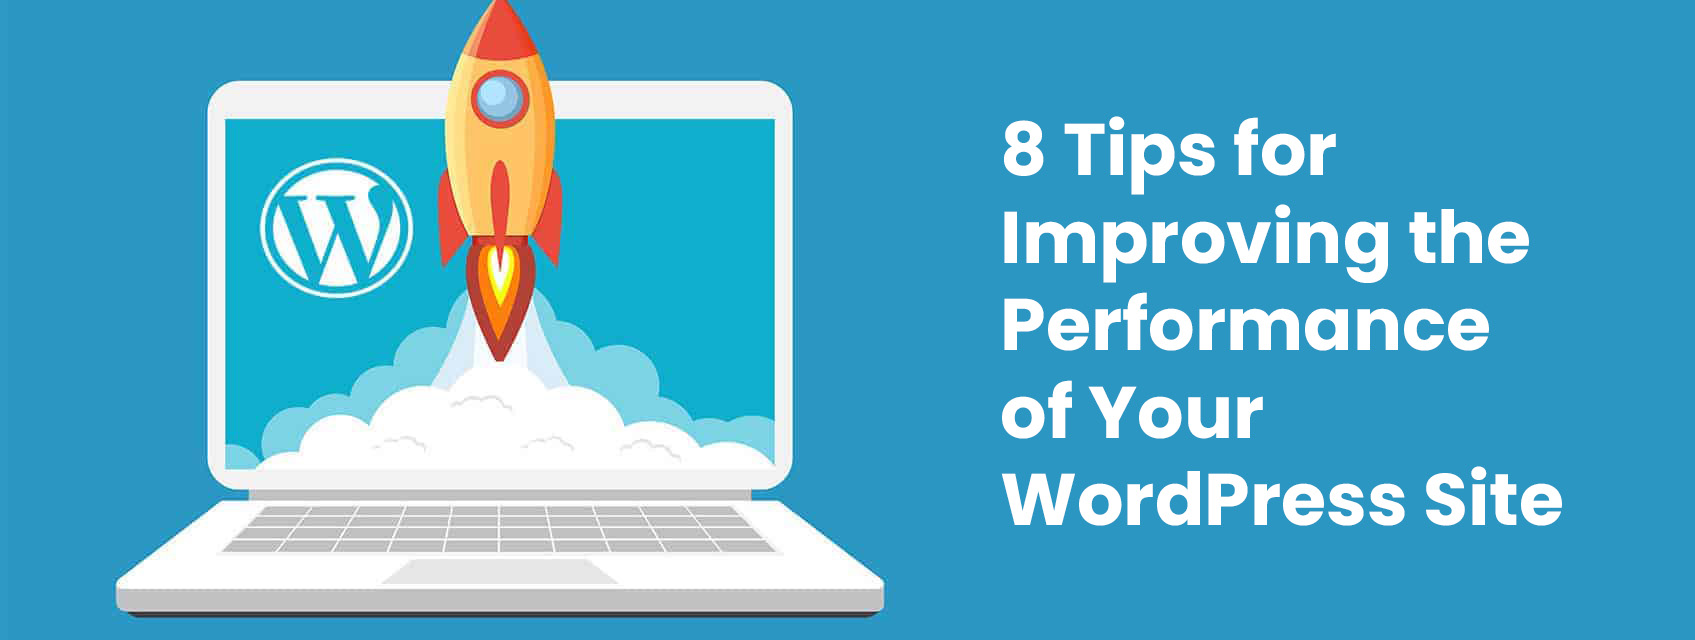 8 Tips for Improving the Performance of Your WordPress Site